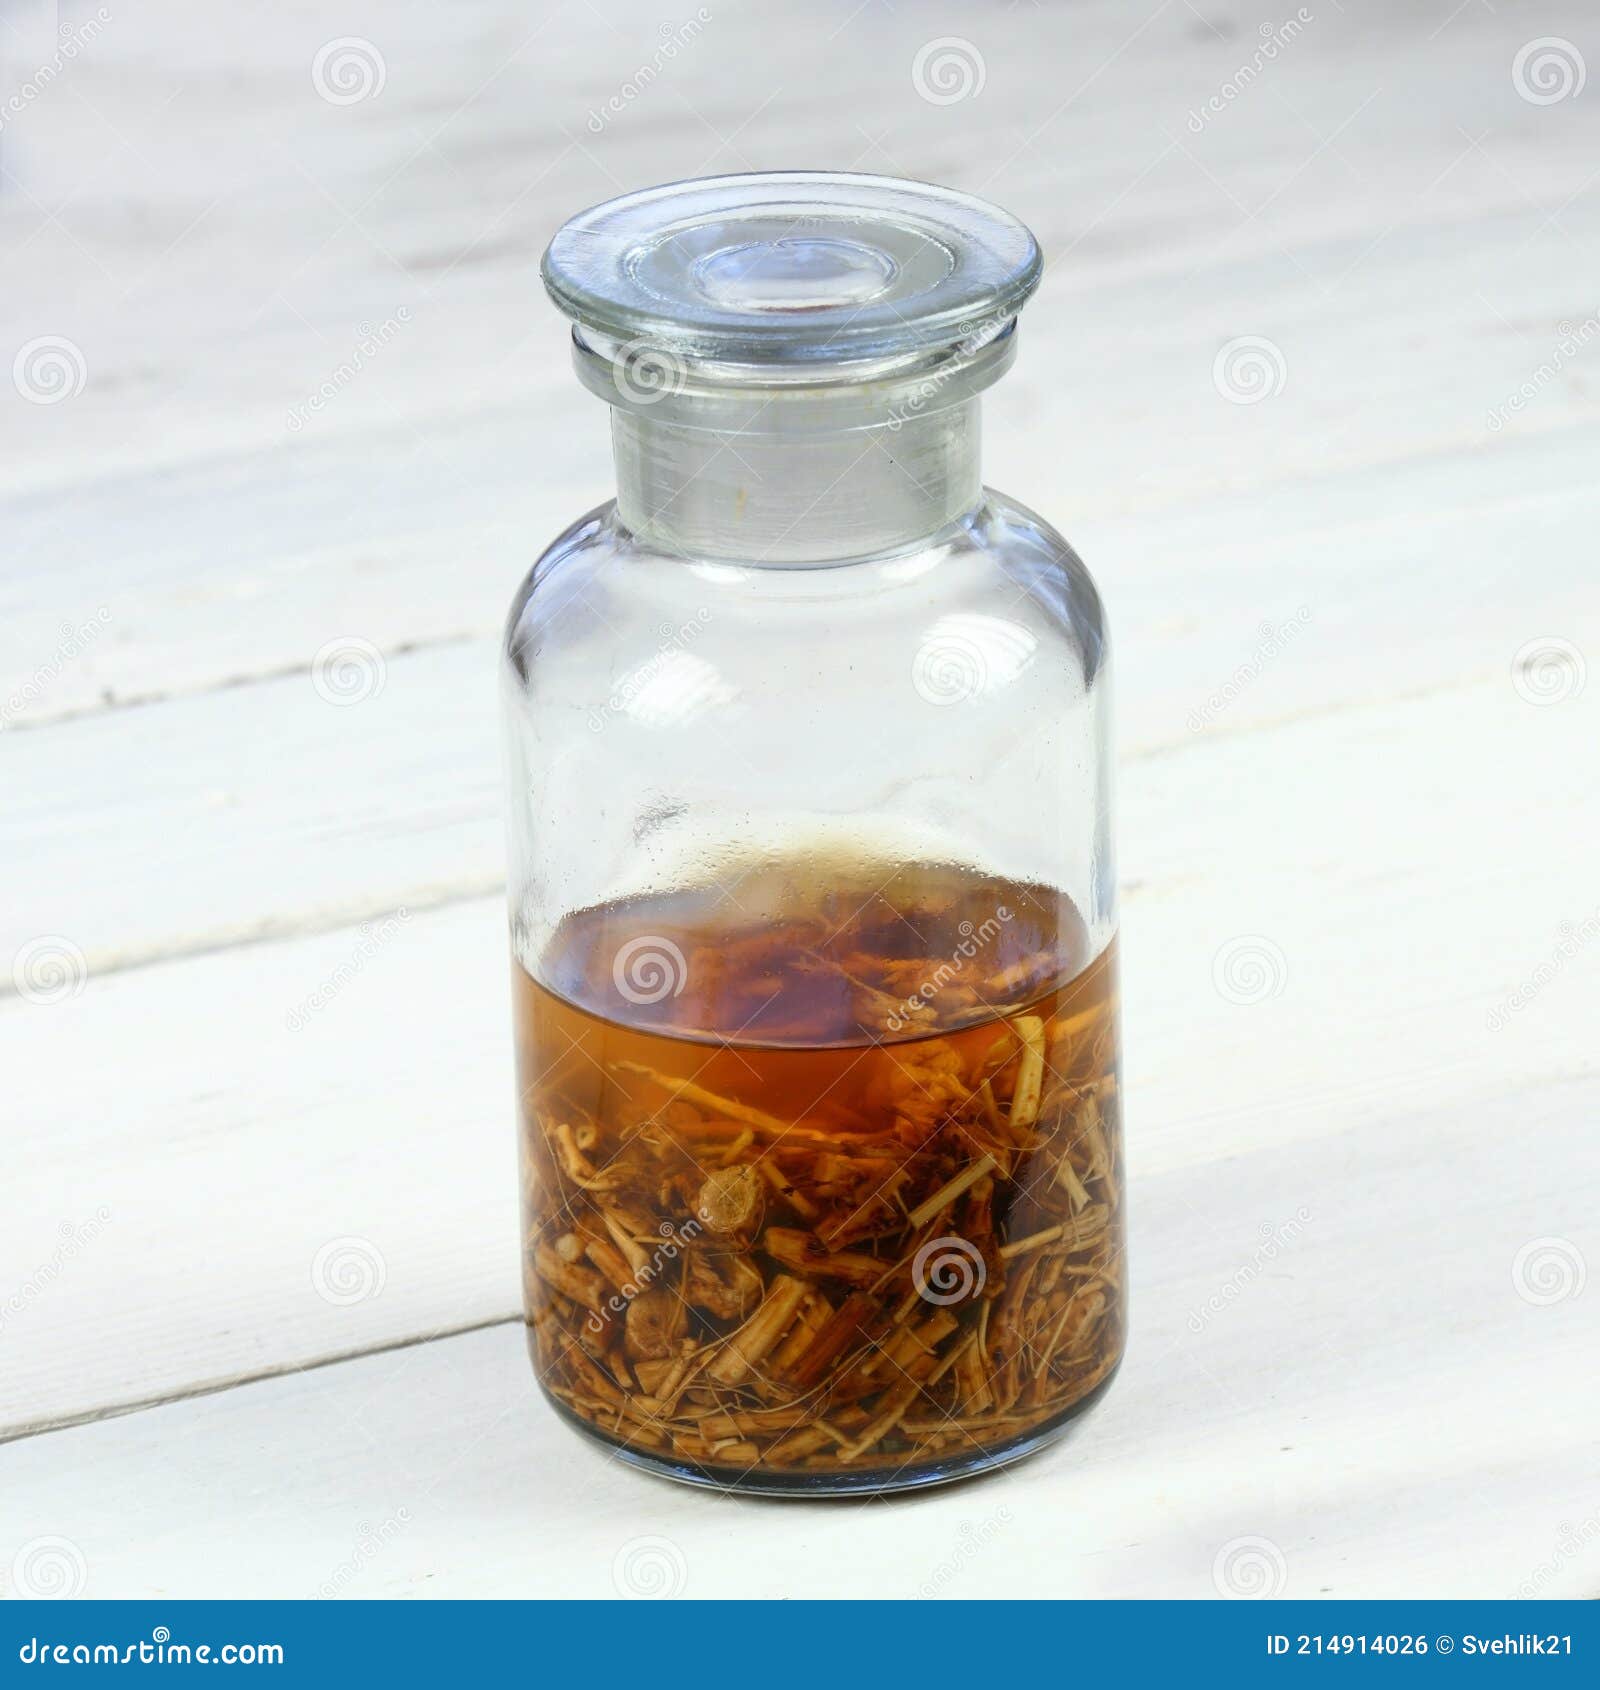 Tincture from Dried Nettle Roots and Alcohol Stock Photo - Image of  curative, detail: 214914026